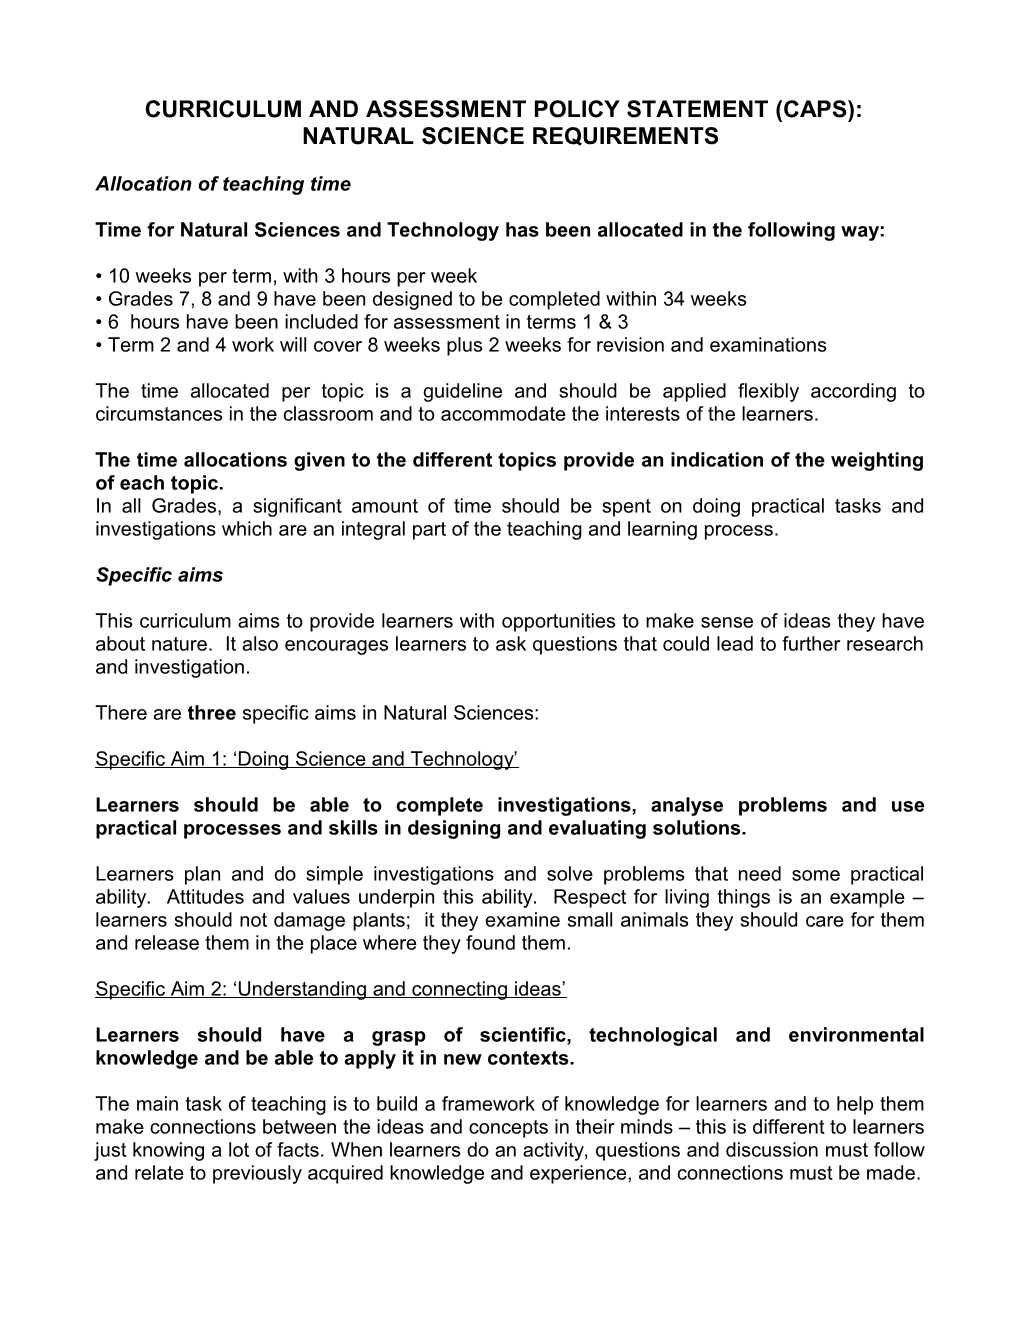 Curriculum and Assessment Policy Statement (Caps)